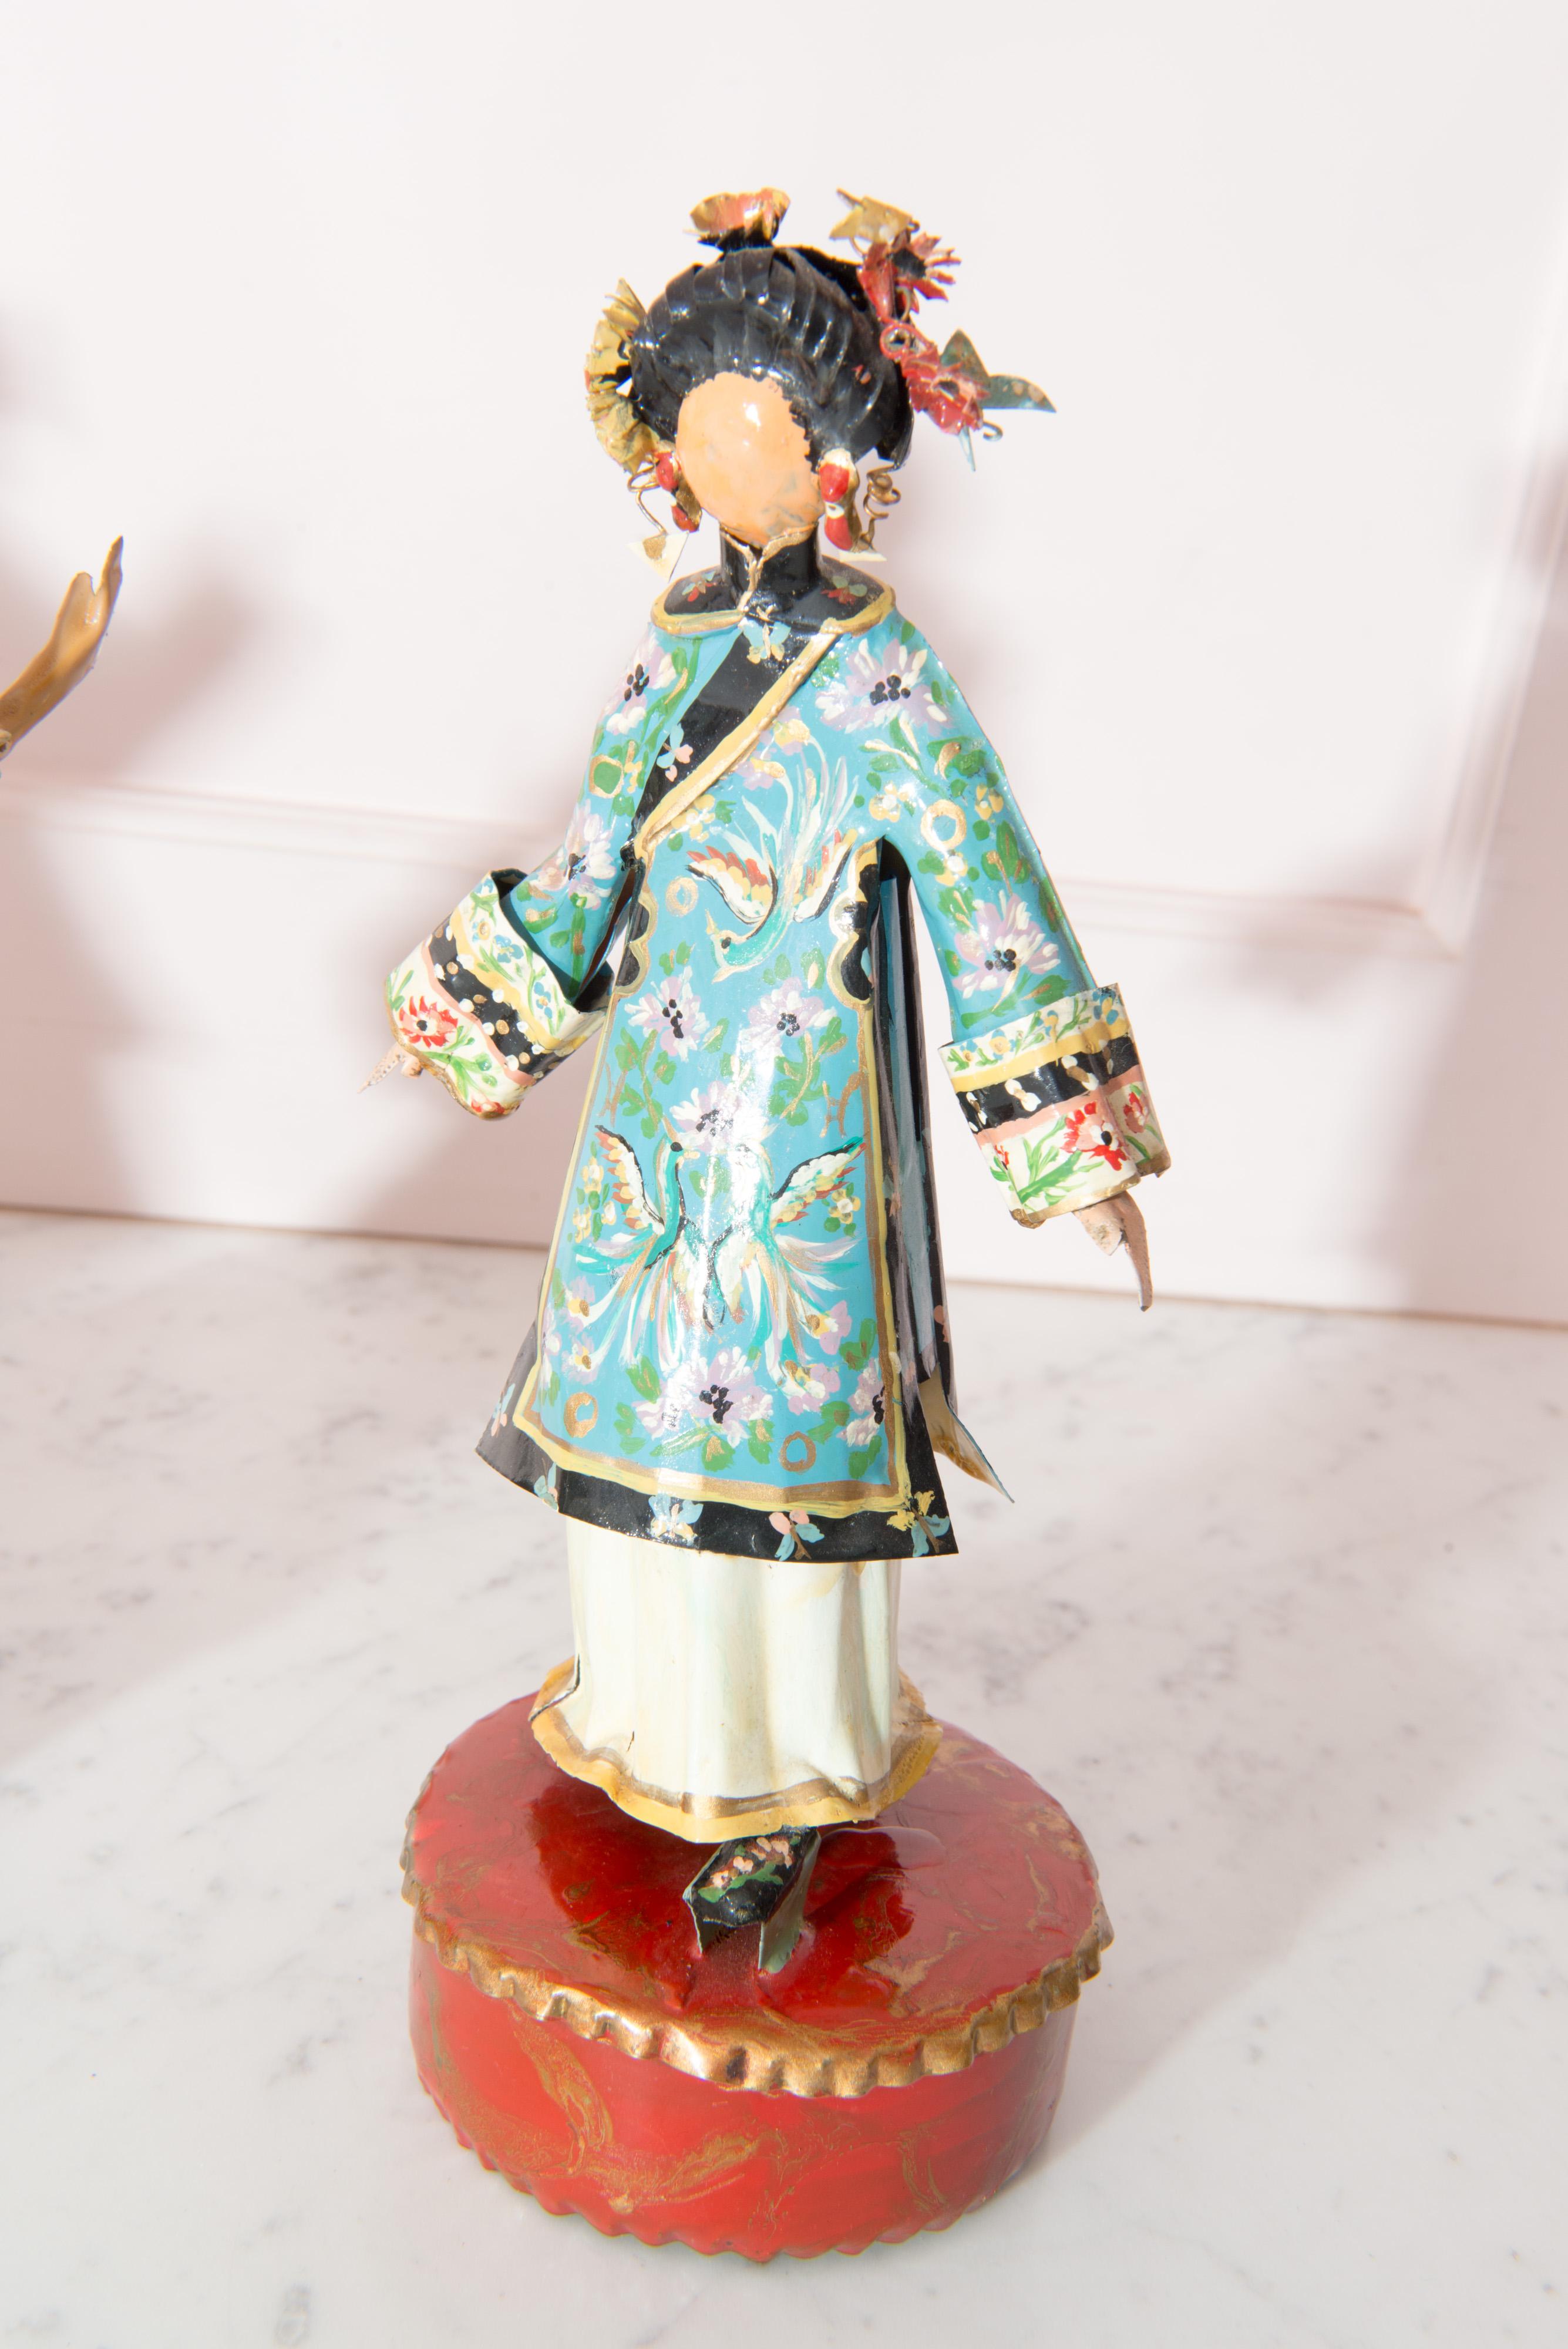 Lee Menichetti, (1931 - 1997) New York & Palm Beach, well known mid-century artist known for his theatre related art.These sculptures are made of hand bent brass and hand painted sheet brass. China Empress in green floral 1890-1900. Hong Kong